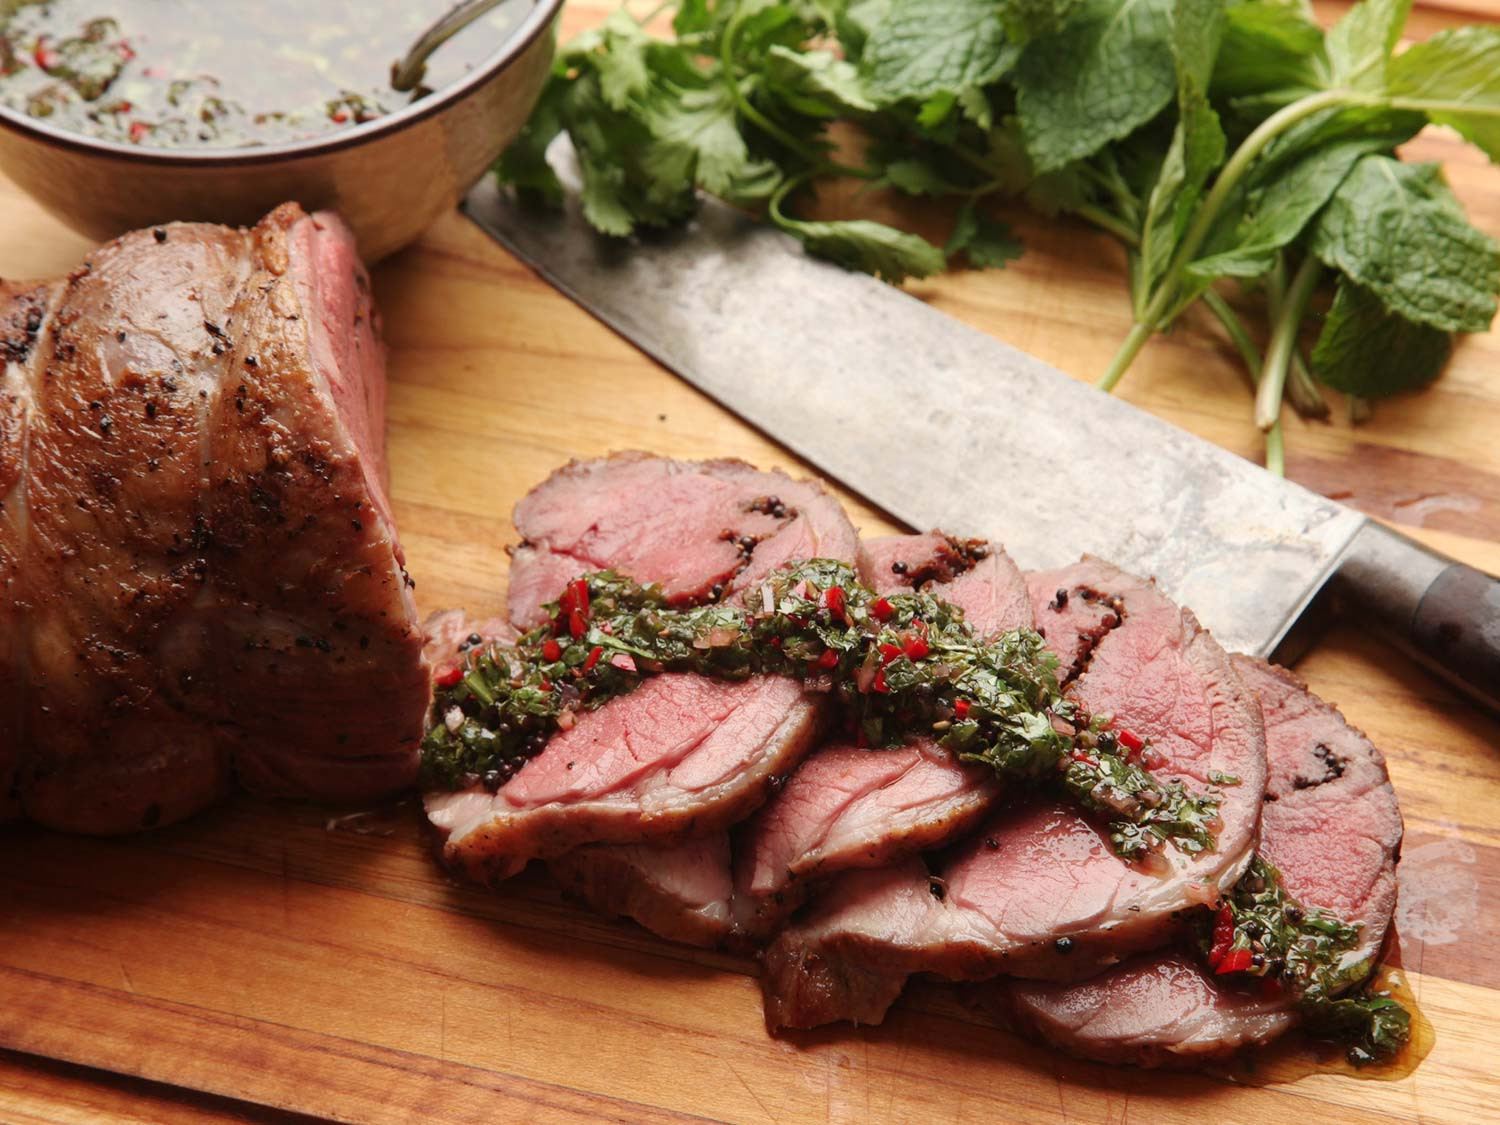 Easter Lamb Dinner Menu
 What to Cook for Easter Brunch and Dinner